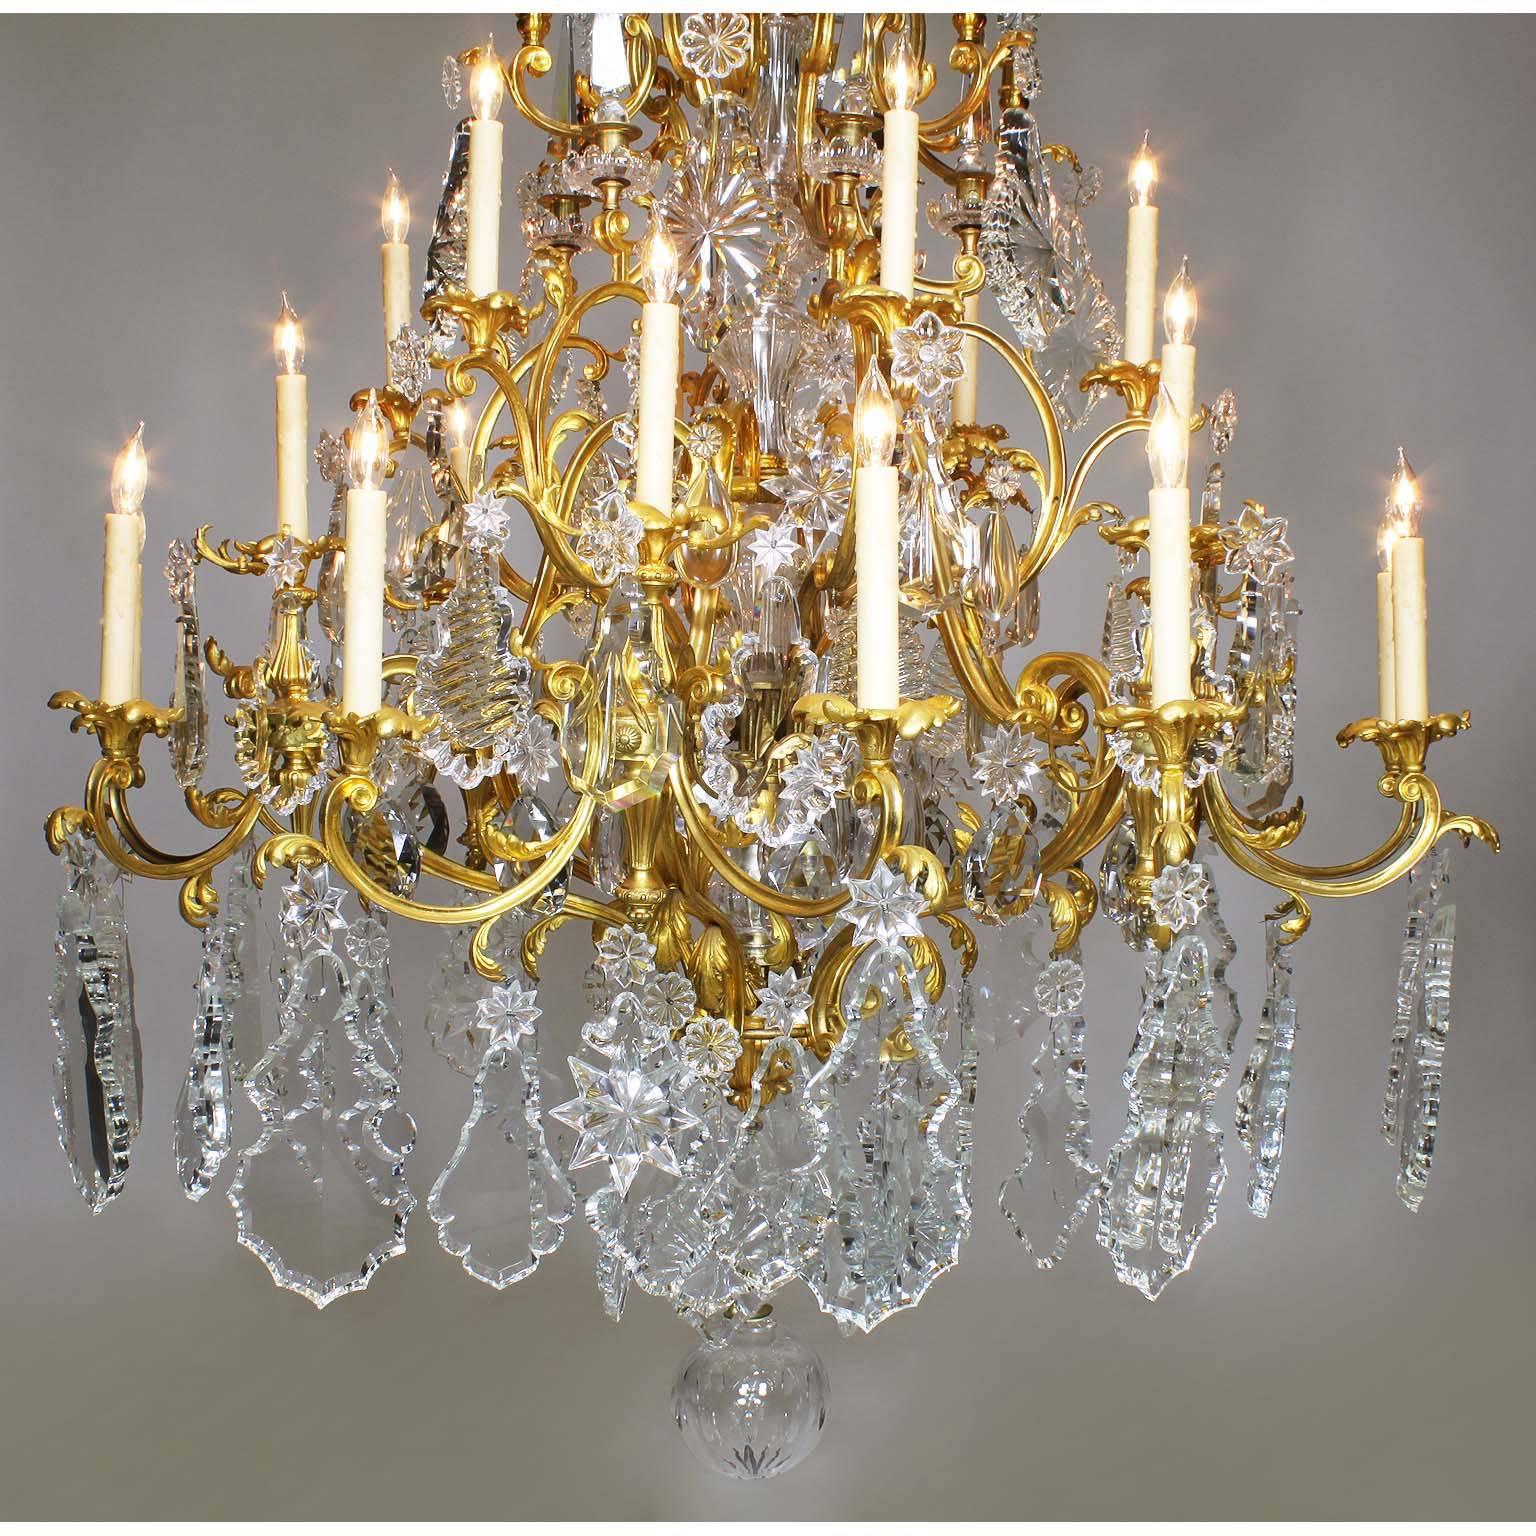 French 19th Century Louis XV Style Gilt-Bronze Crystal Chandelier Attr. Baccarat For Sale 1